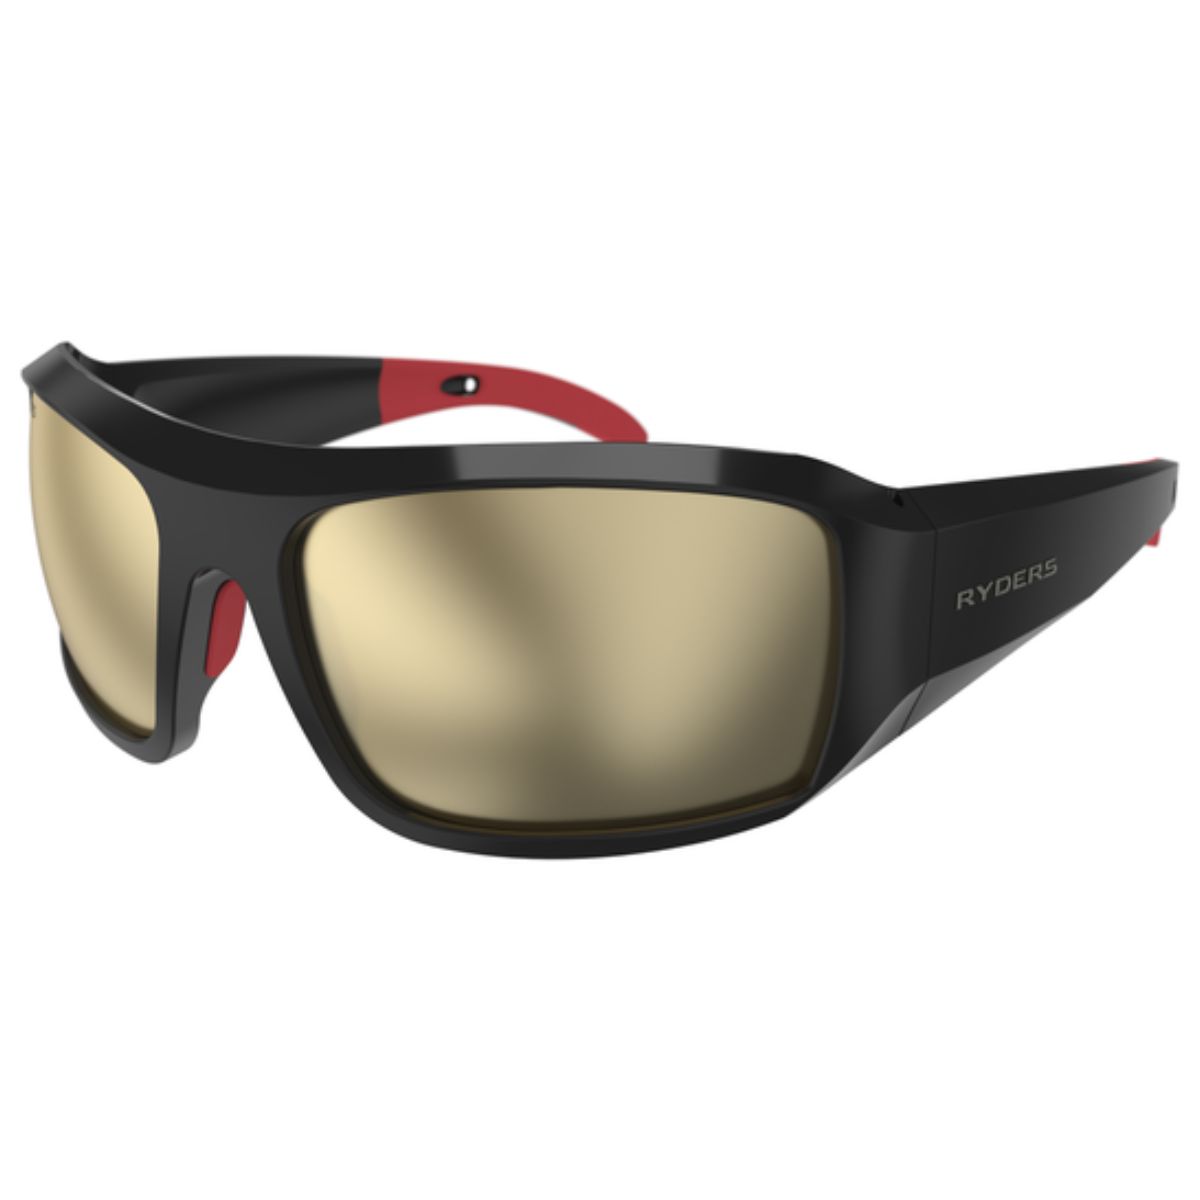 Ryders Powell Black Red Polarized Glasses - Brown Lens